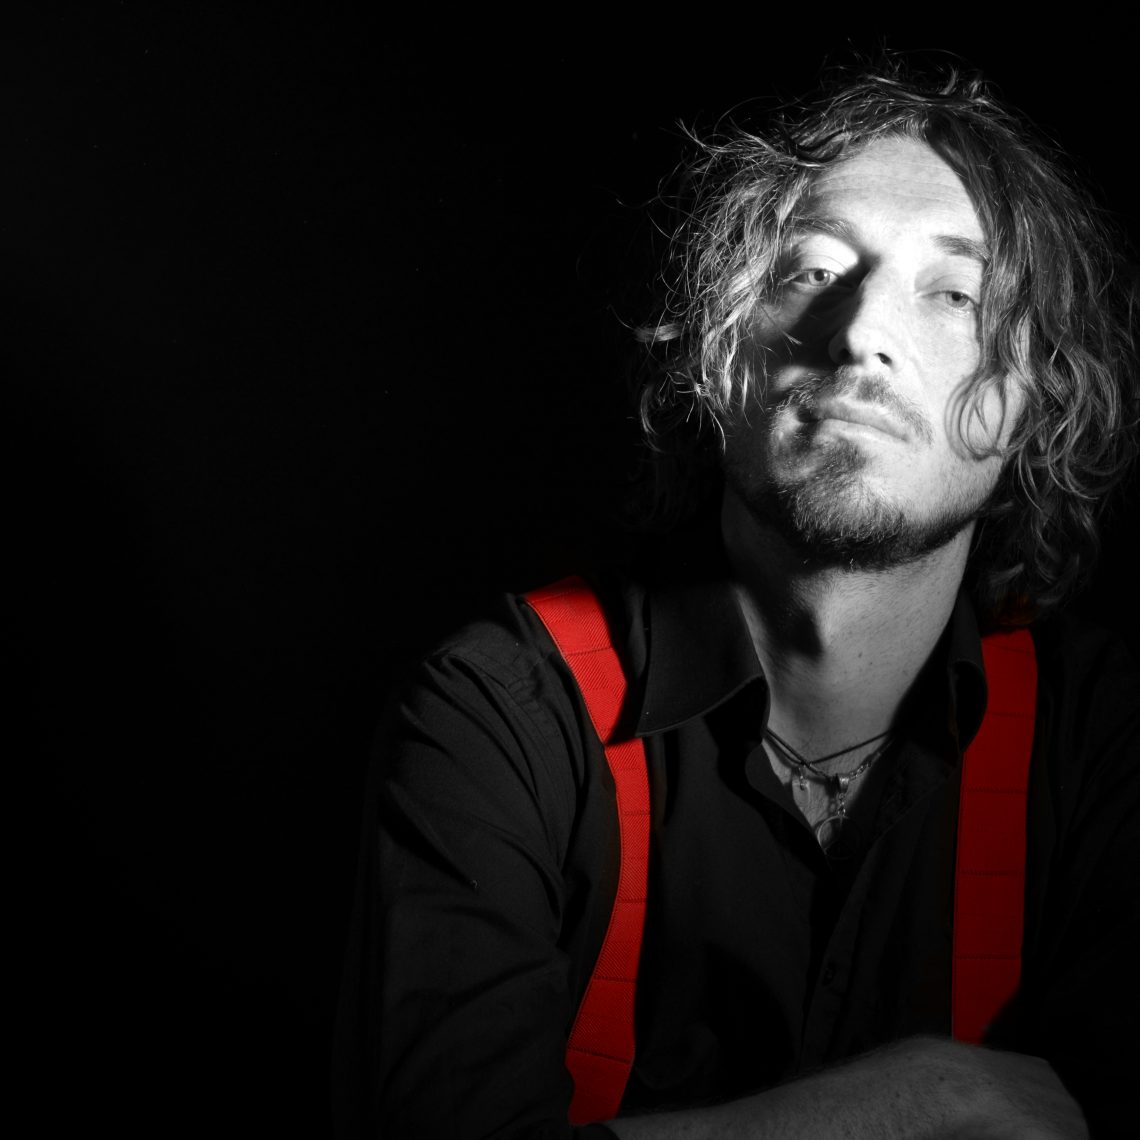 Wille and the Bandits’ Frontman Releases single and reveals video ‘Houses on the Sand’ to Help the Homeless: Video, Single and EP Now Out!